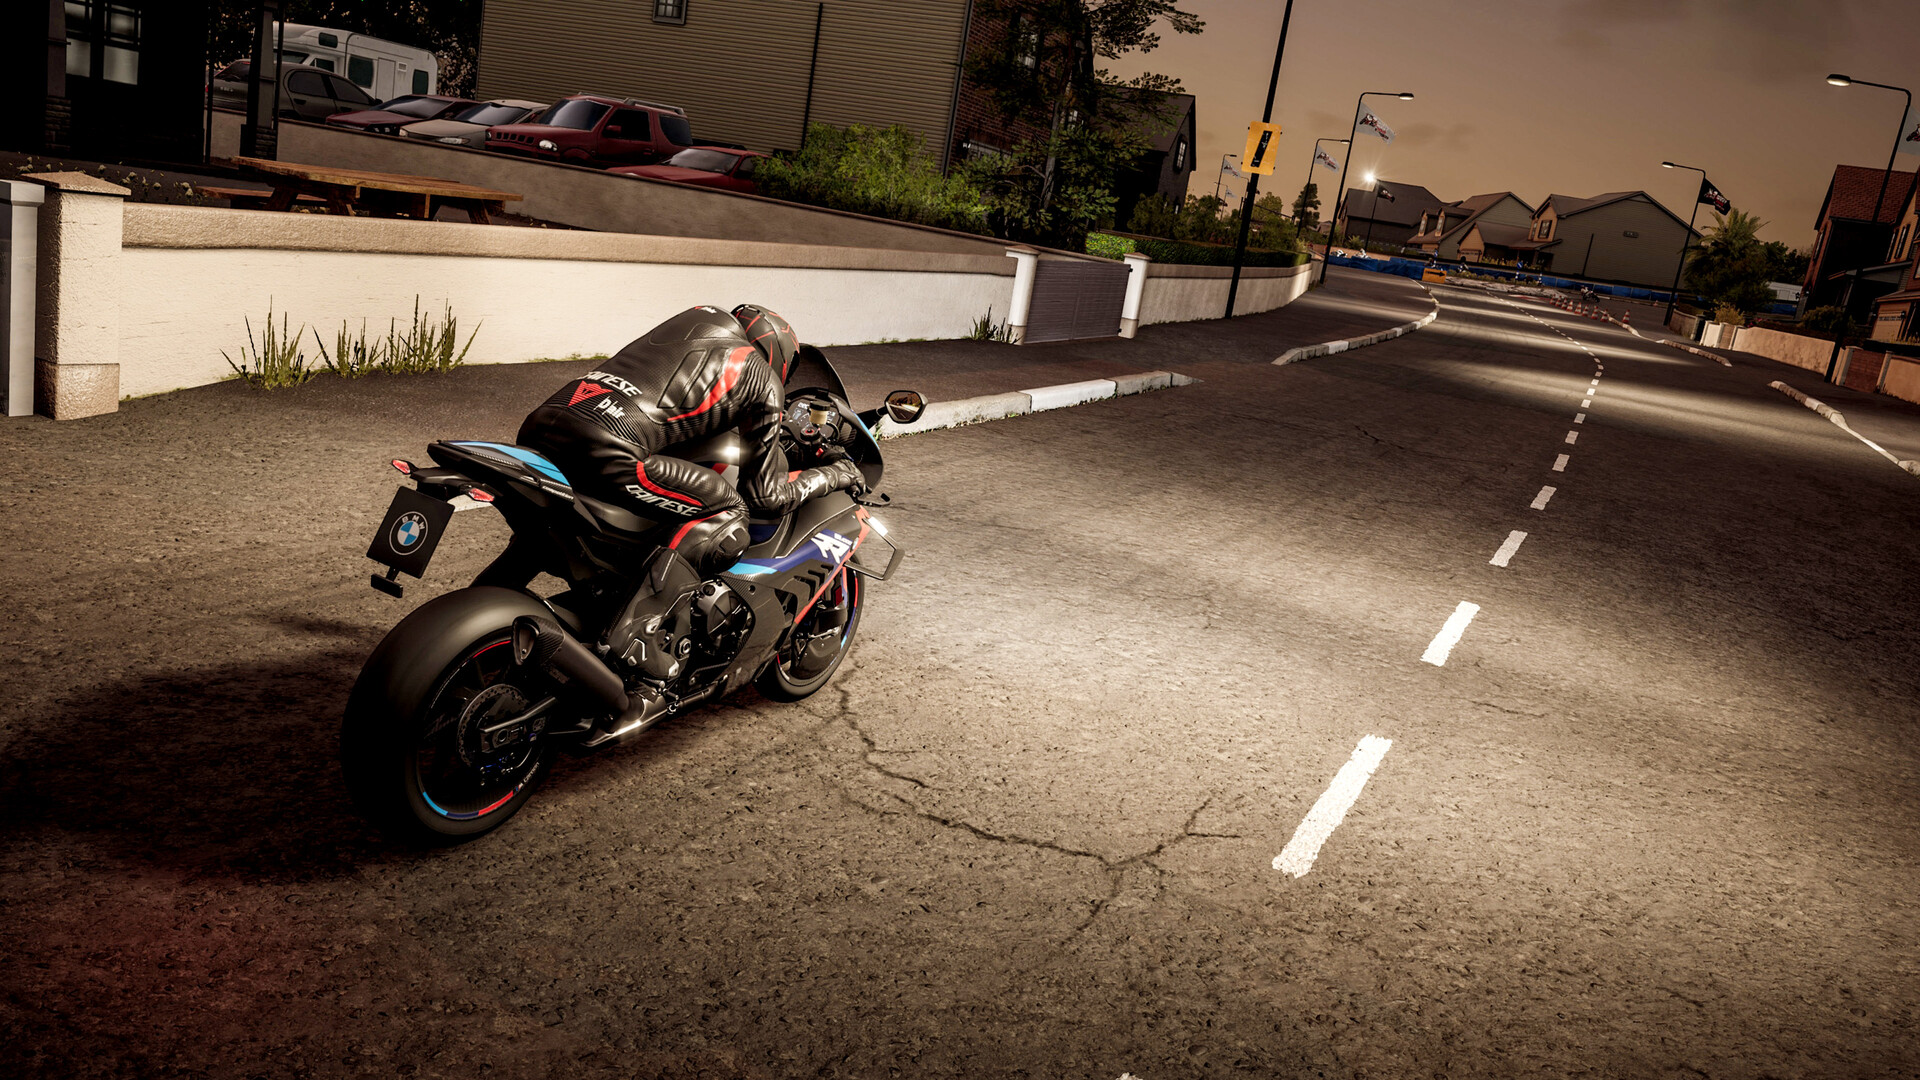 RIDE 5 System Requirements - Can I Run It? - PCGameBenchmark